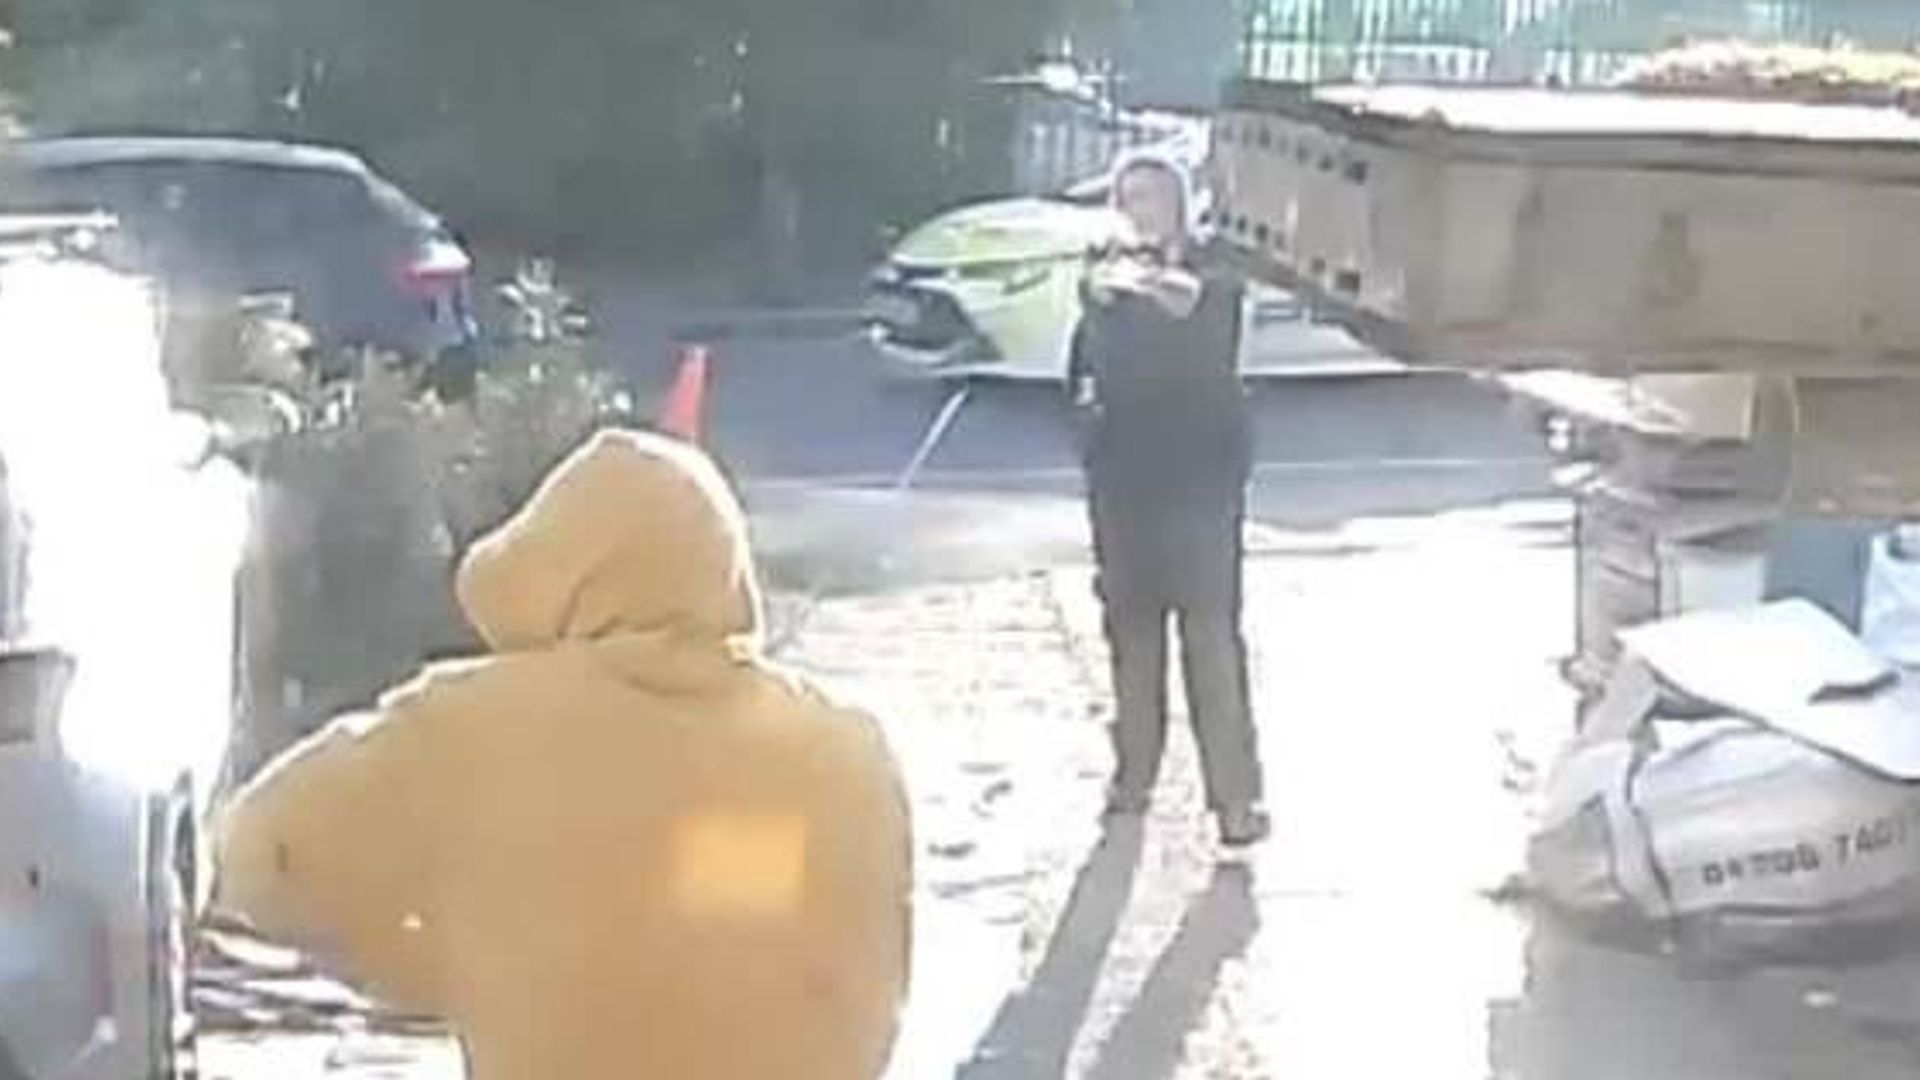 Video shows moment sword attack suspect is tasered and arrested